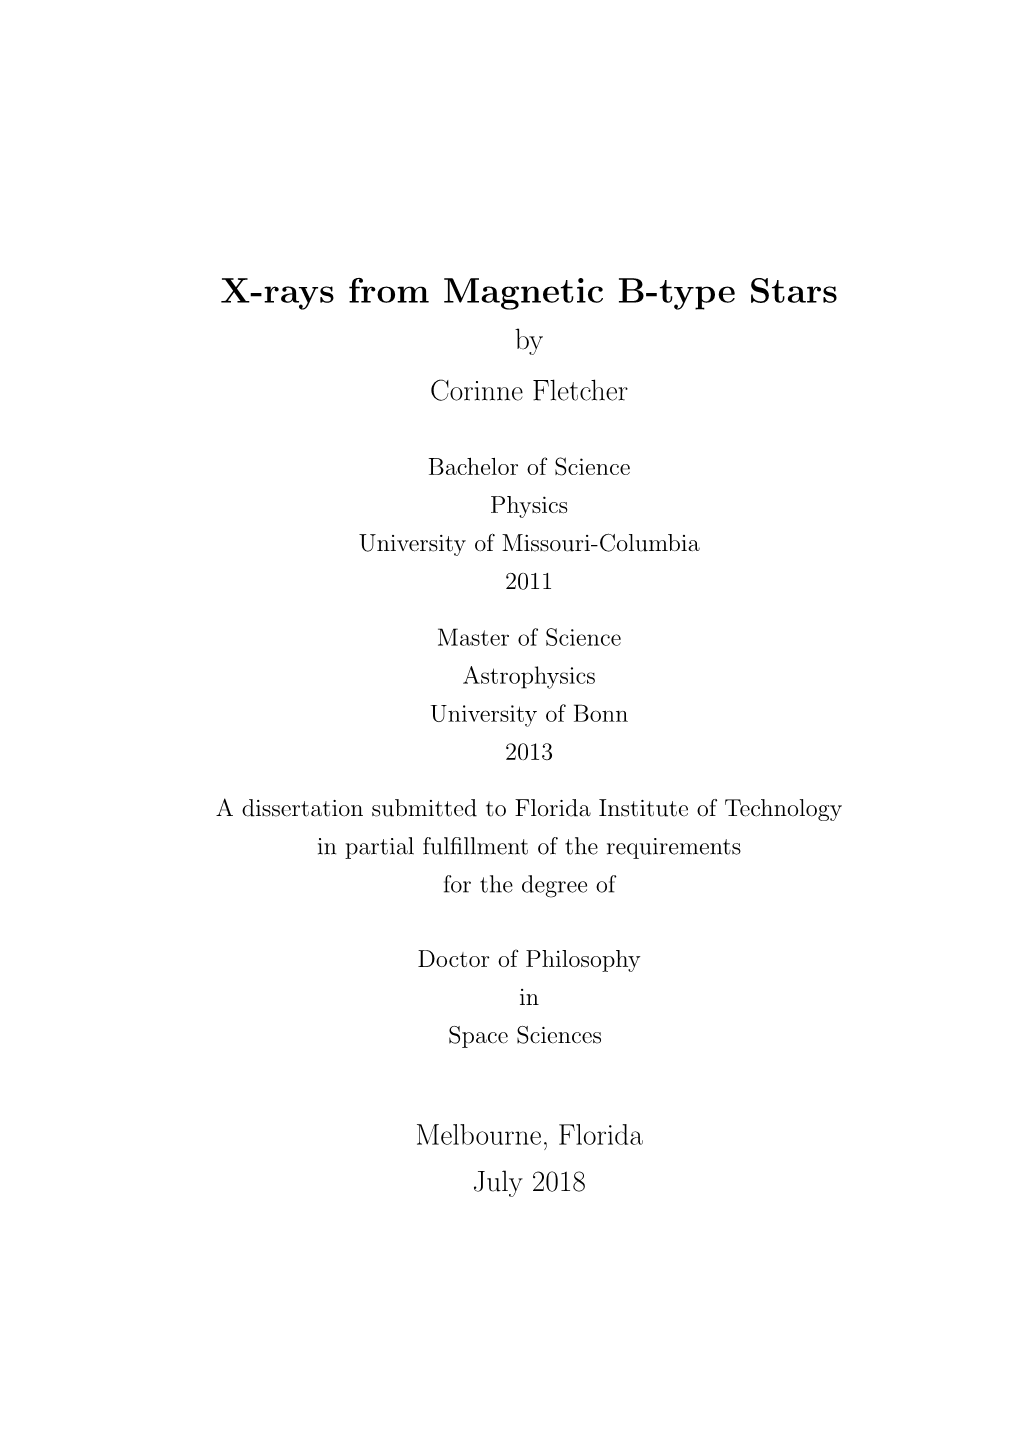 X-Rays from Magnetic B-Type Stars by Corinne Fletcher